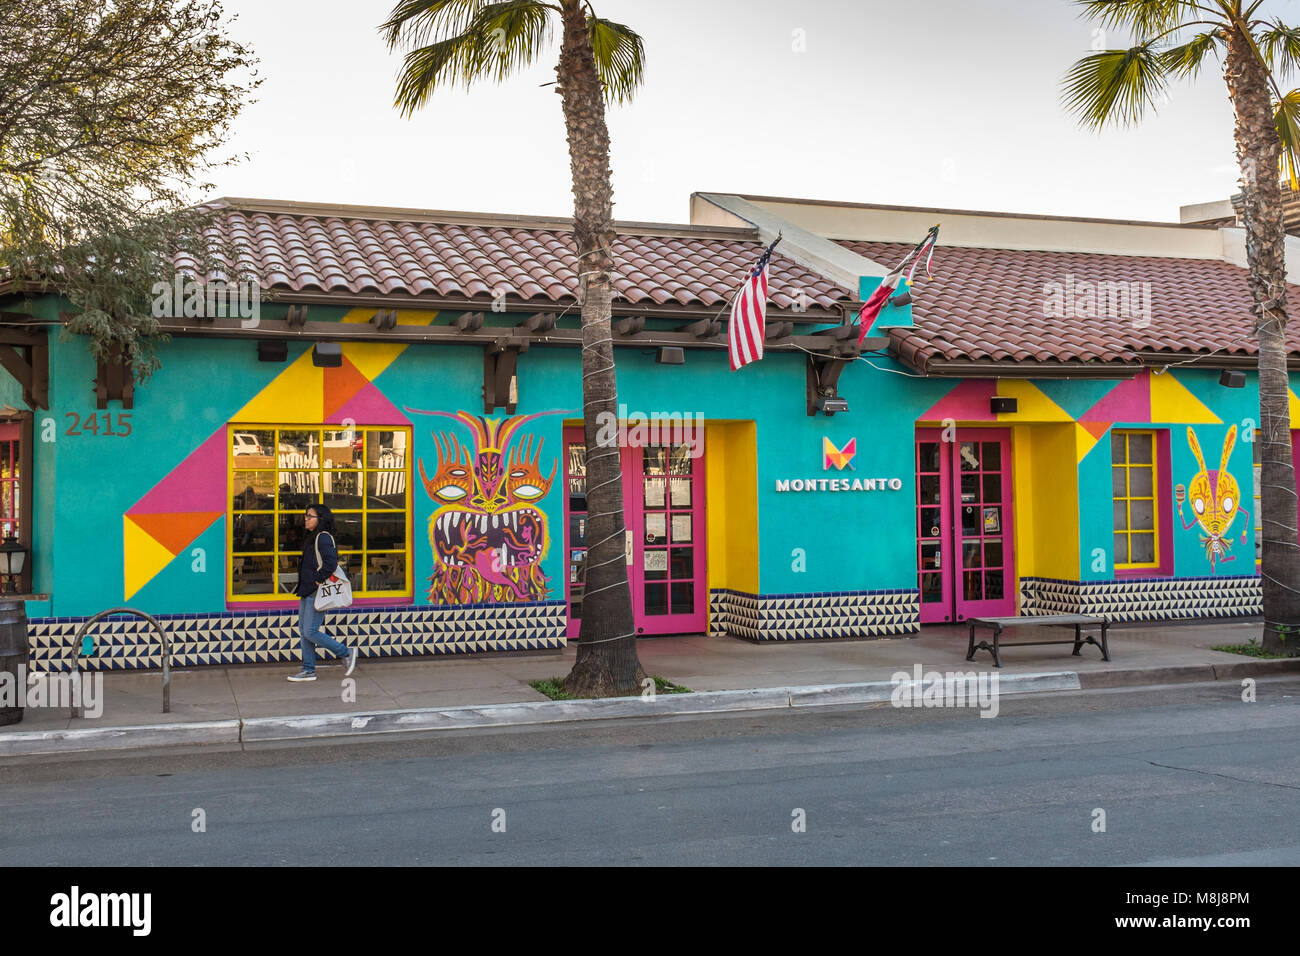 SAN DIEGO, CALIFORNIA, USA - Colourful Mexican food restaurant located on San Diego Avenue in the historic Old Town neighbourhood of the city. Stock Photo